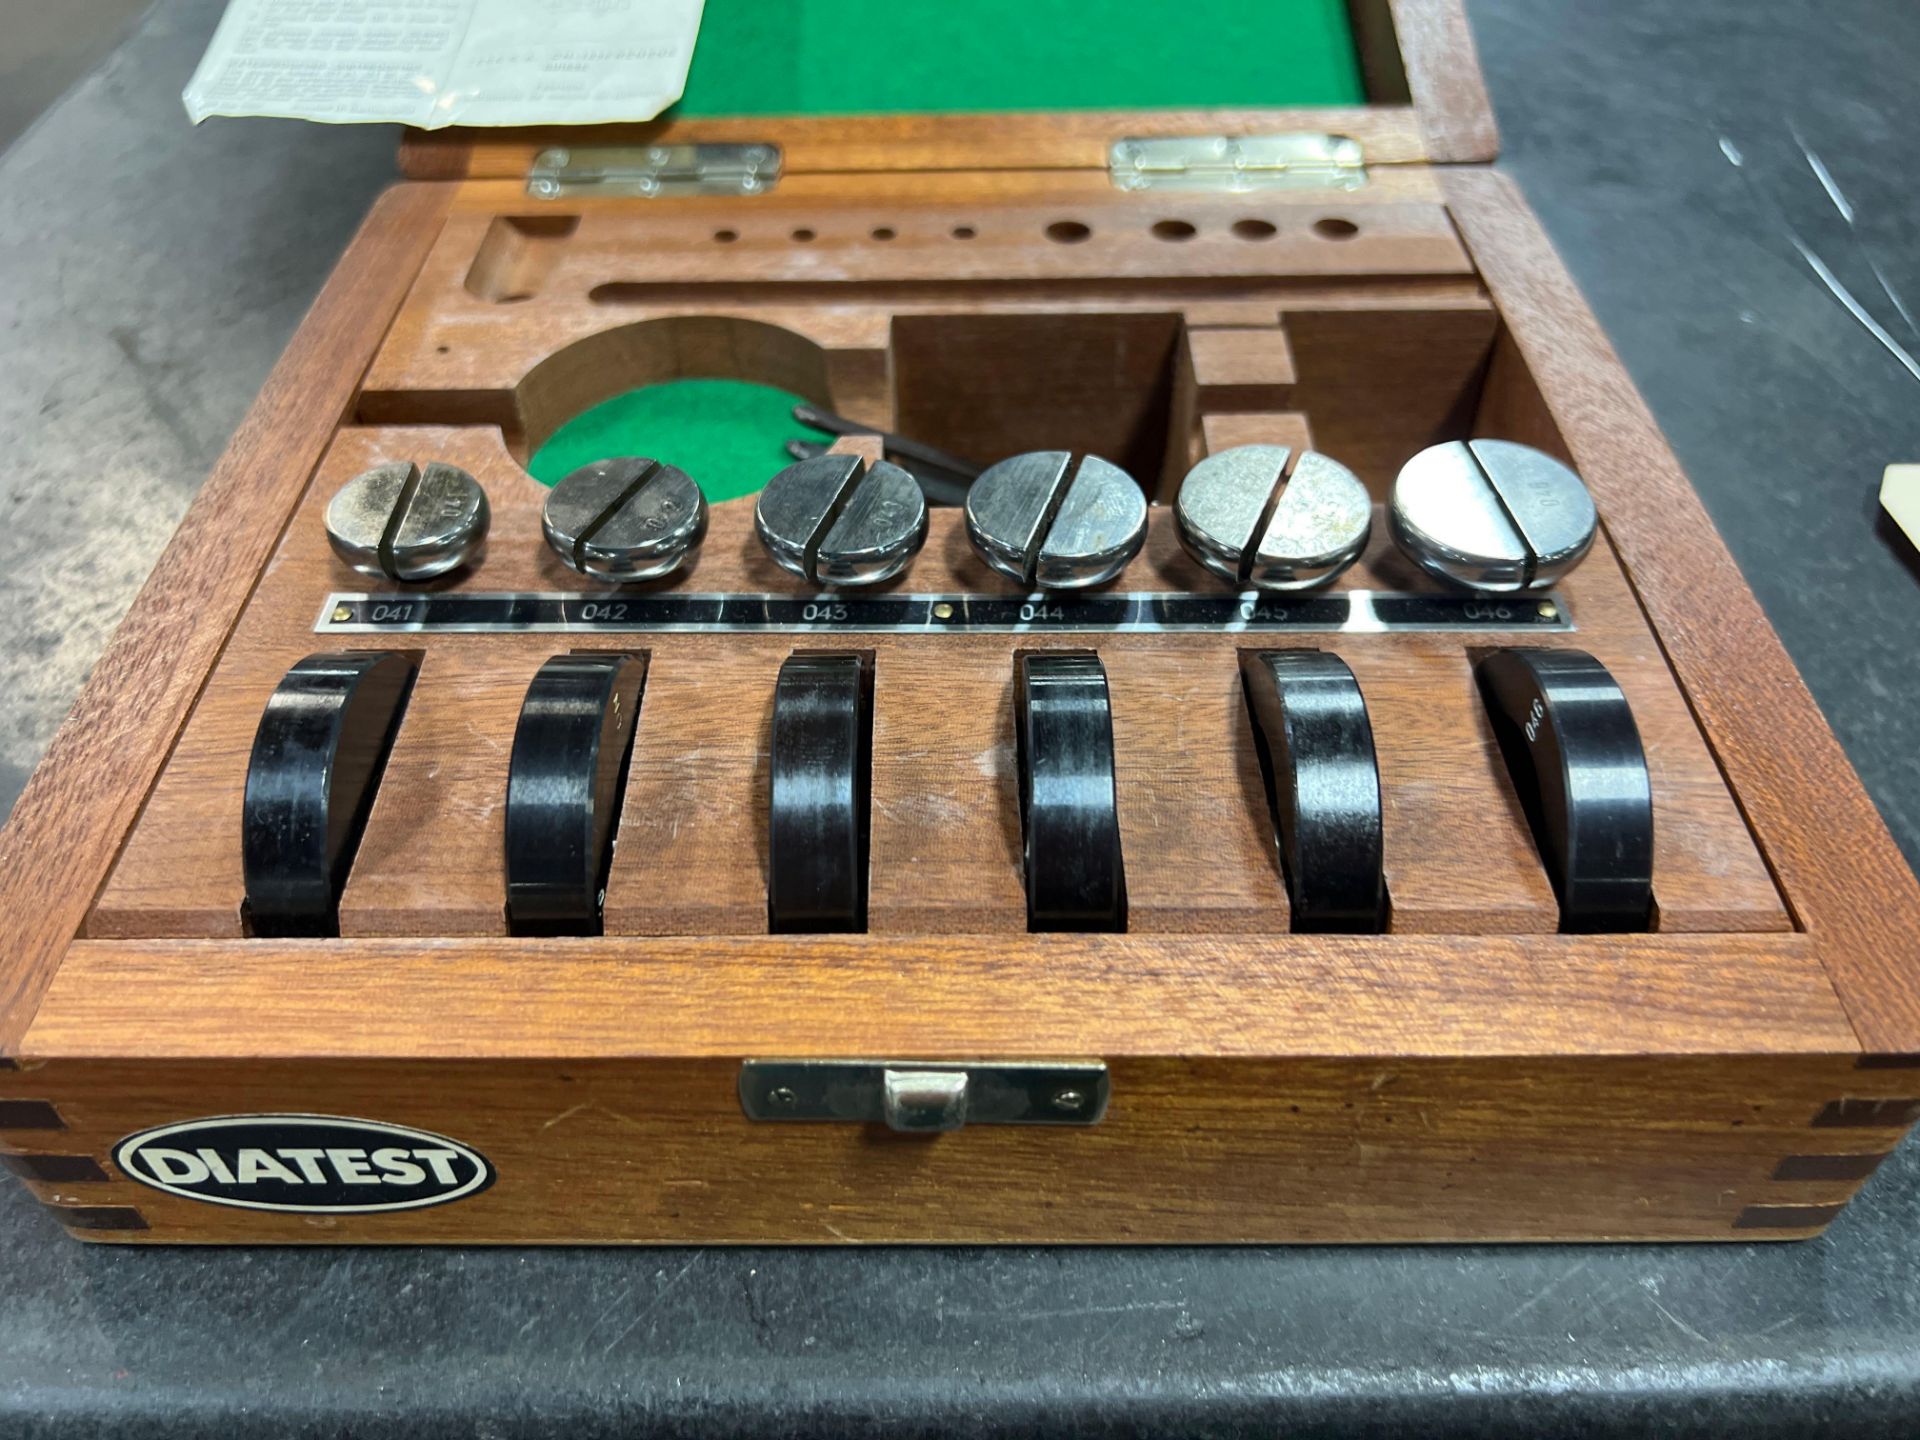 Diatest Bore Gage Rings Set, .8220 - 1.130in w/ Wood Case - Image 3 of 4